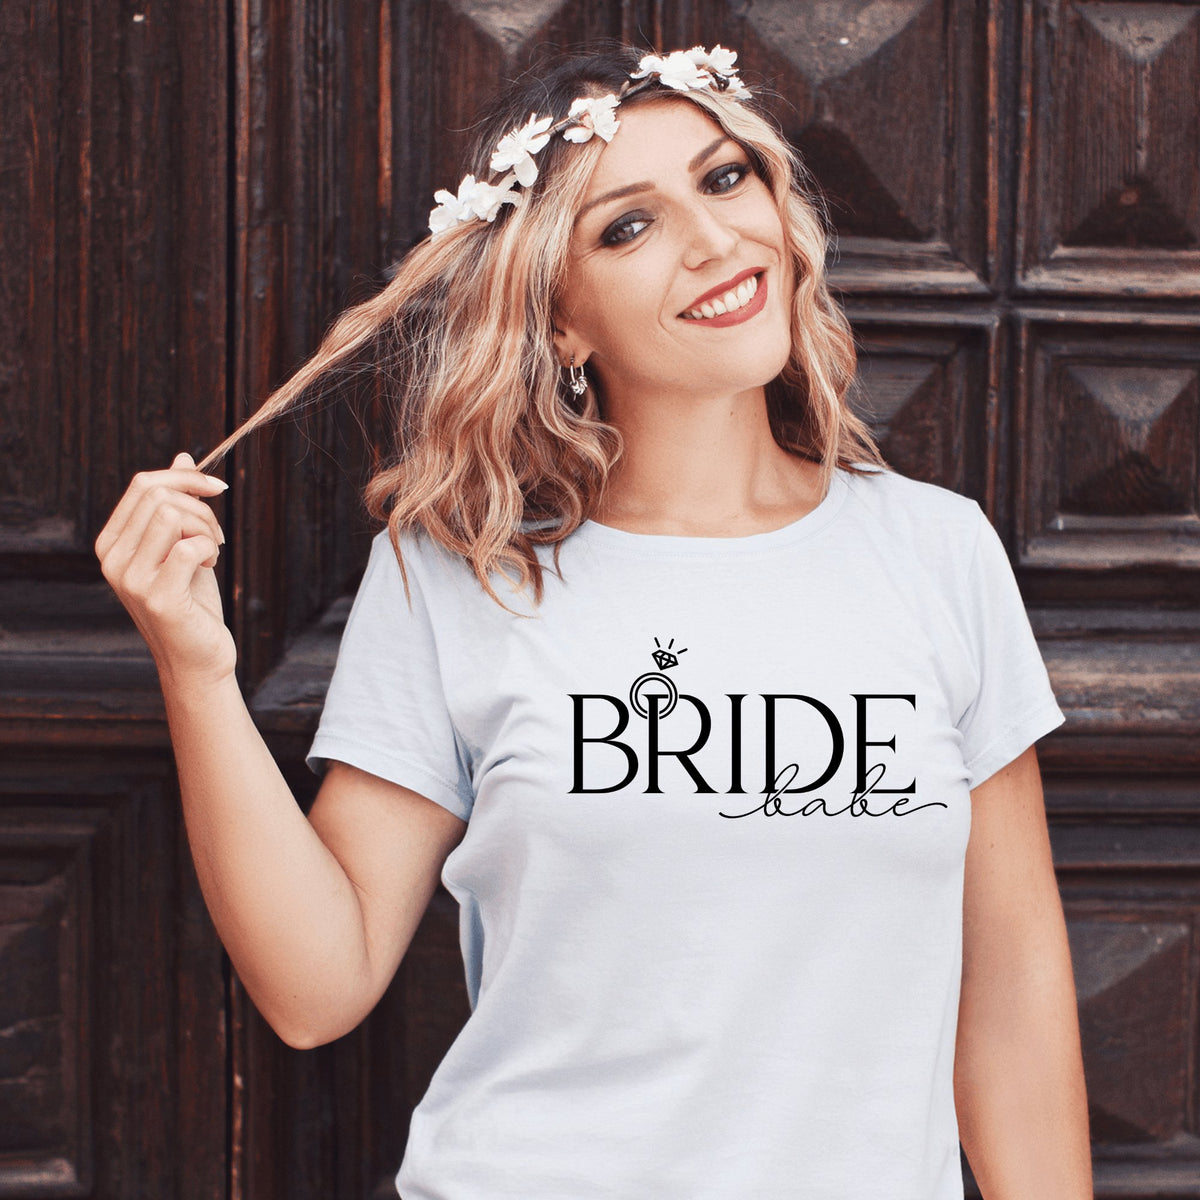 Bride Babe T-Shirt For Bridal Shower - Eventwisecreations